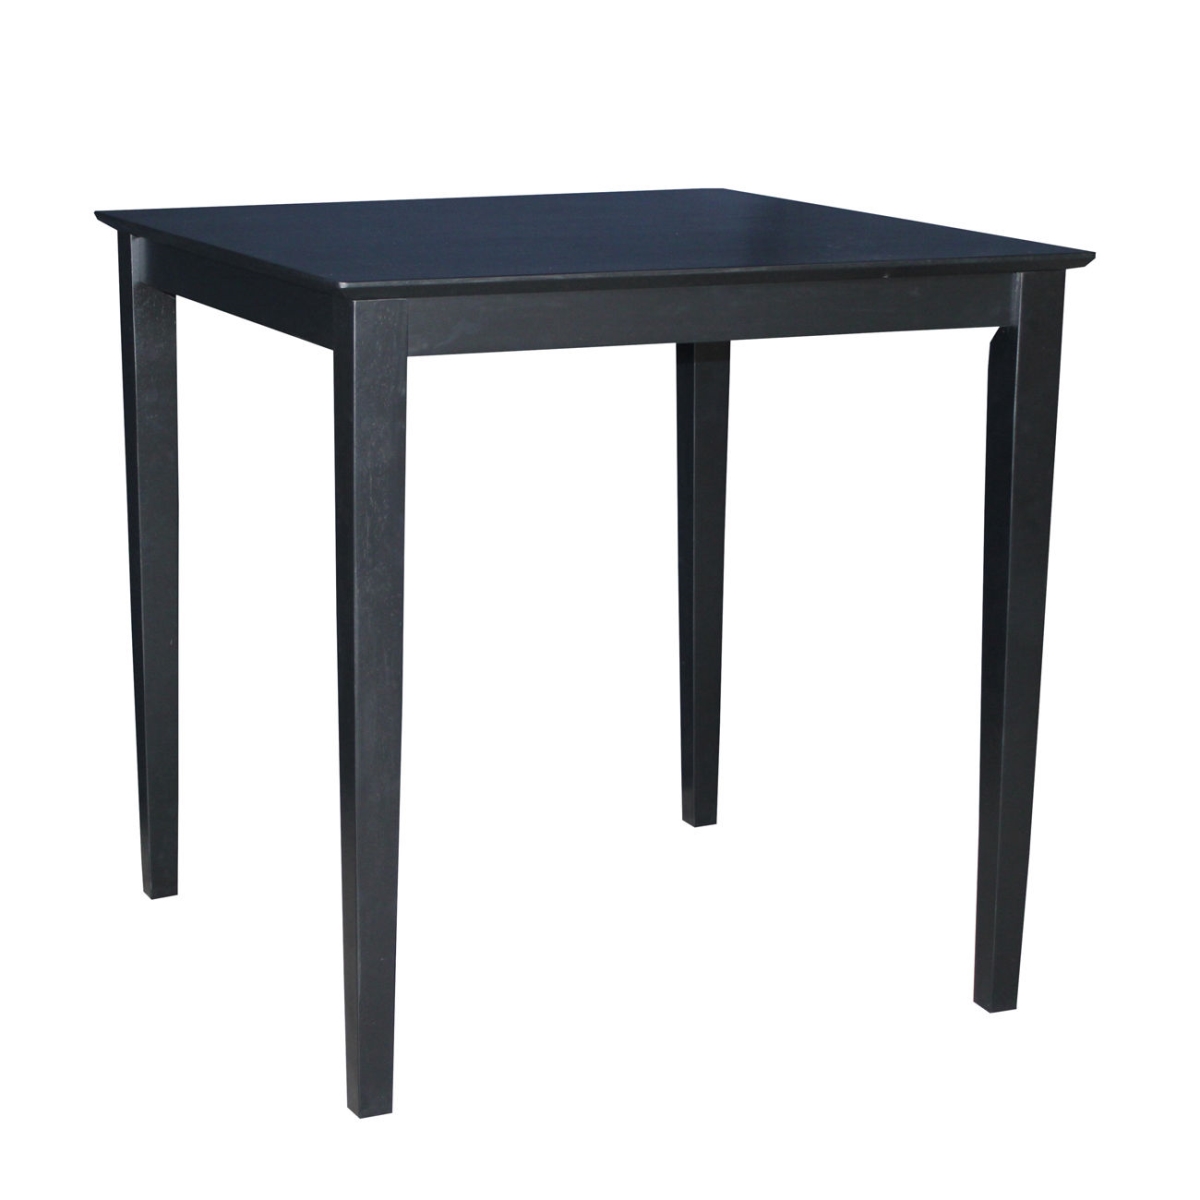 Picture of InternationalConcepts INTC694 Solid Wood Top Table - Shaker Legs, Black - 36 x 36 in.